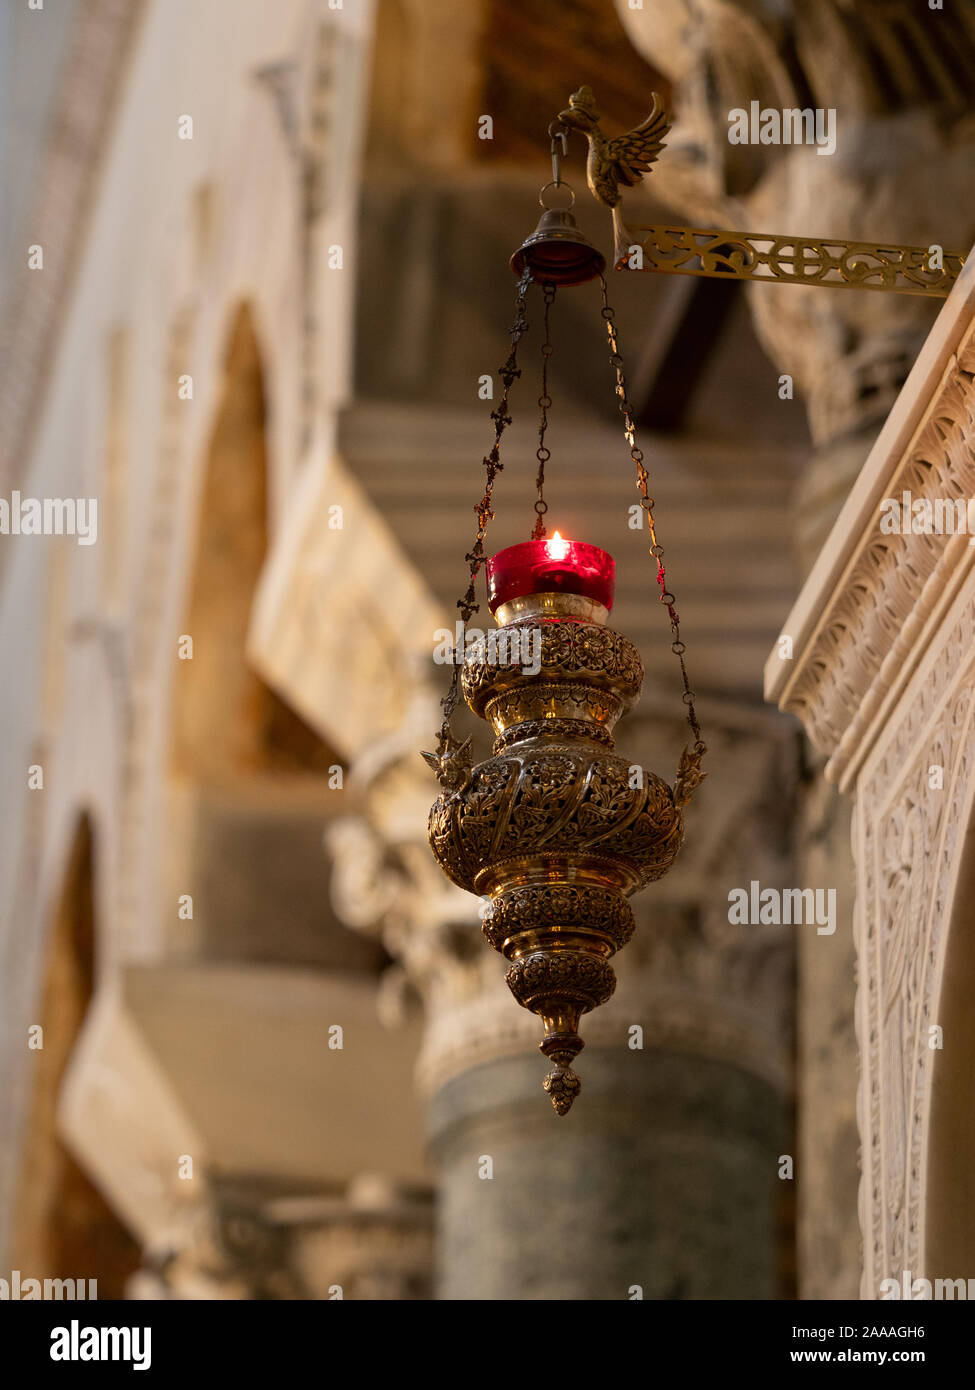 Close up of a hanging brass and red glass candle holder with lit candle hanging in St. Dimitrios Greek Orthodox Church in Thessaloniki, Greece. Stock Photo